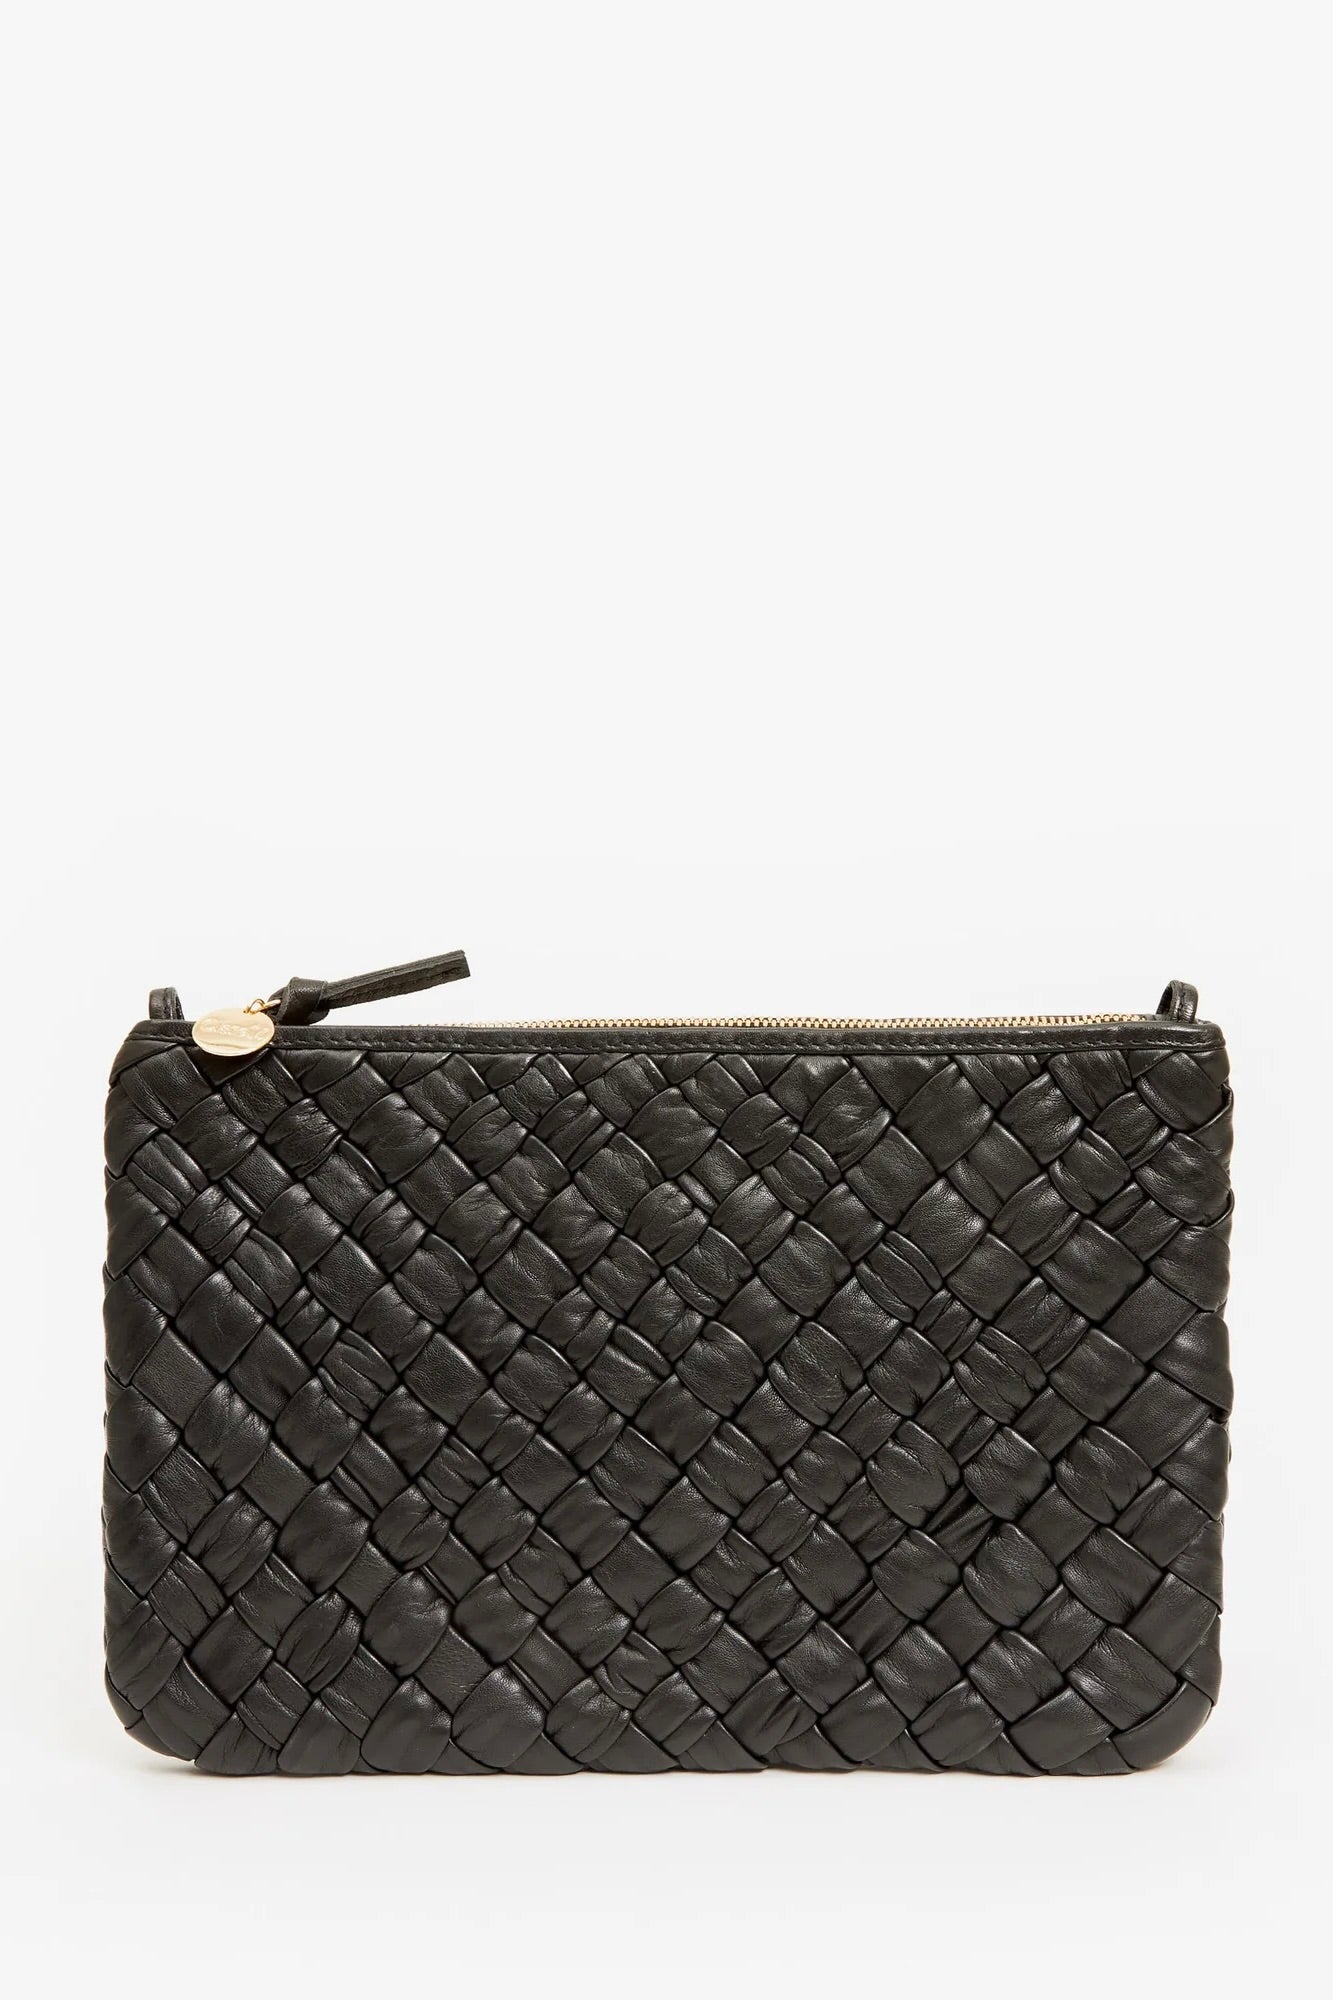 Clare V Flat Clutch with Tabs / Black Puffy Woven